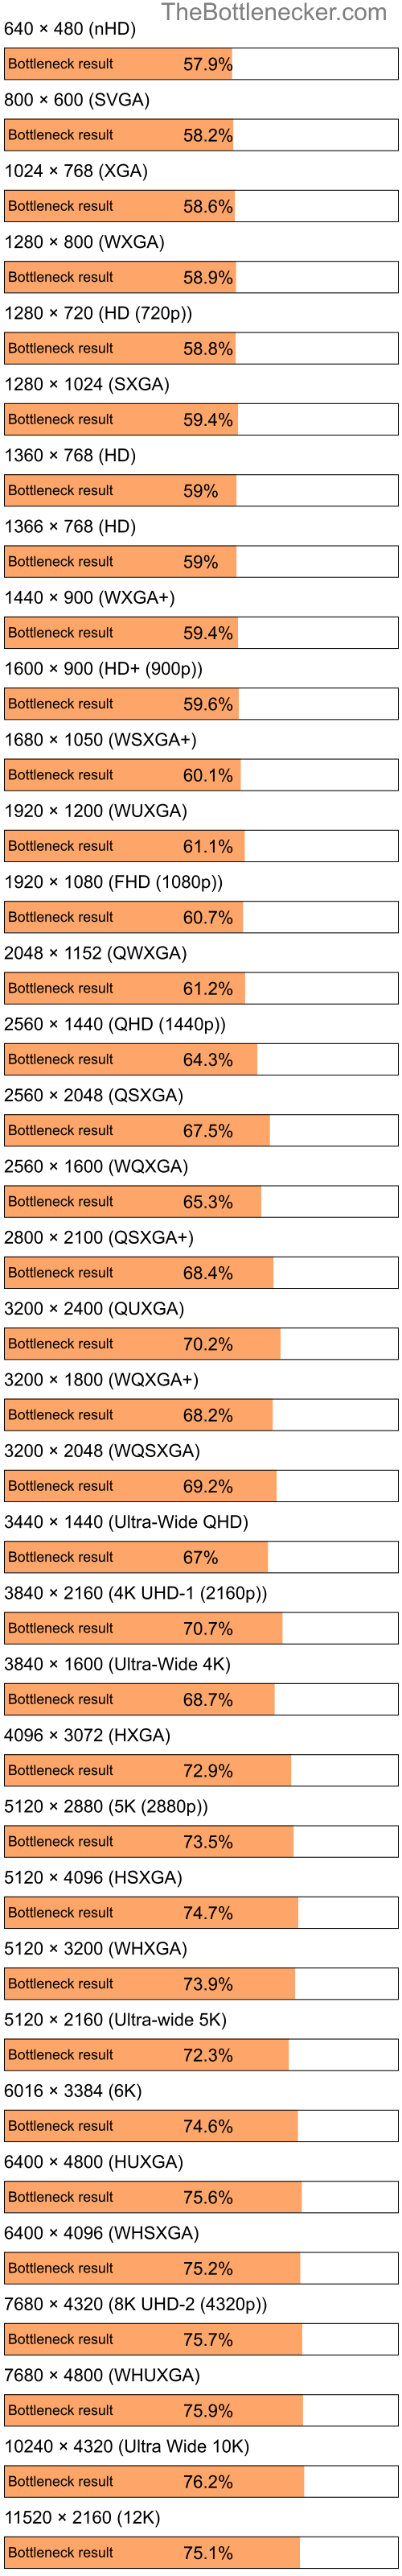 Bottleneck results by resolution for Intel Pentium 4 and NVIDIA Quadro FX 370M in General Tasks